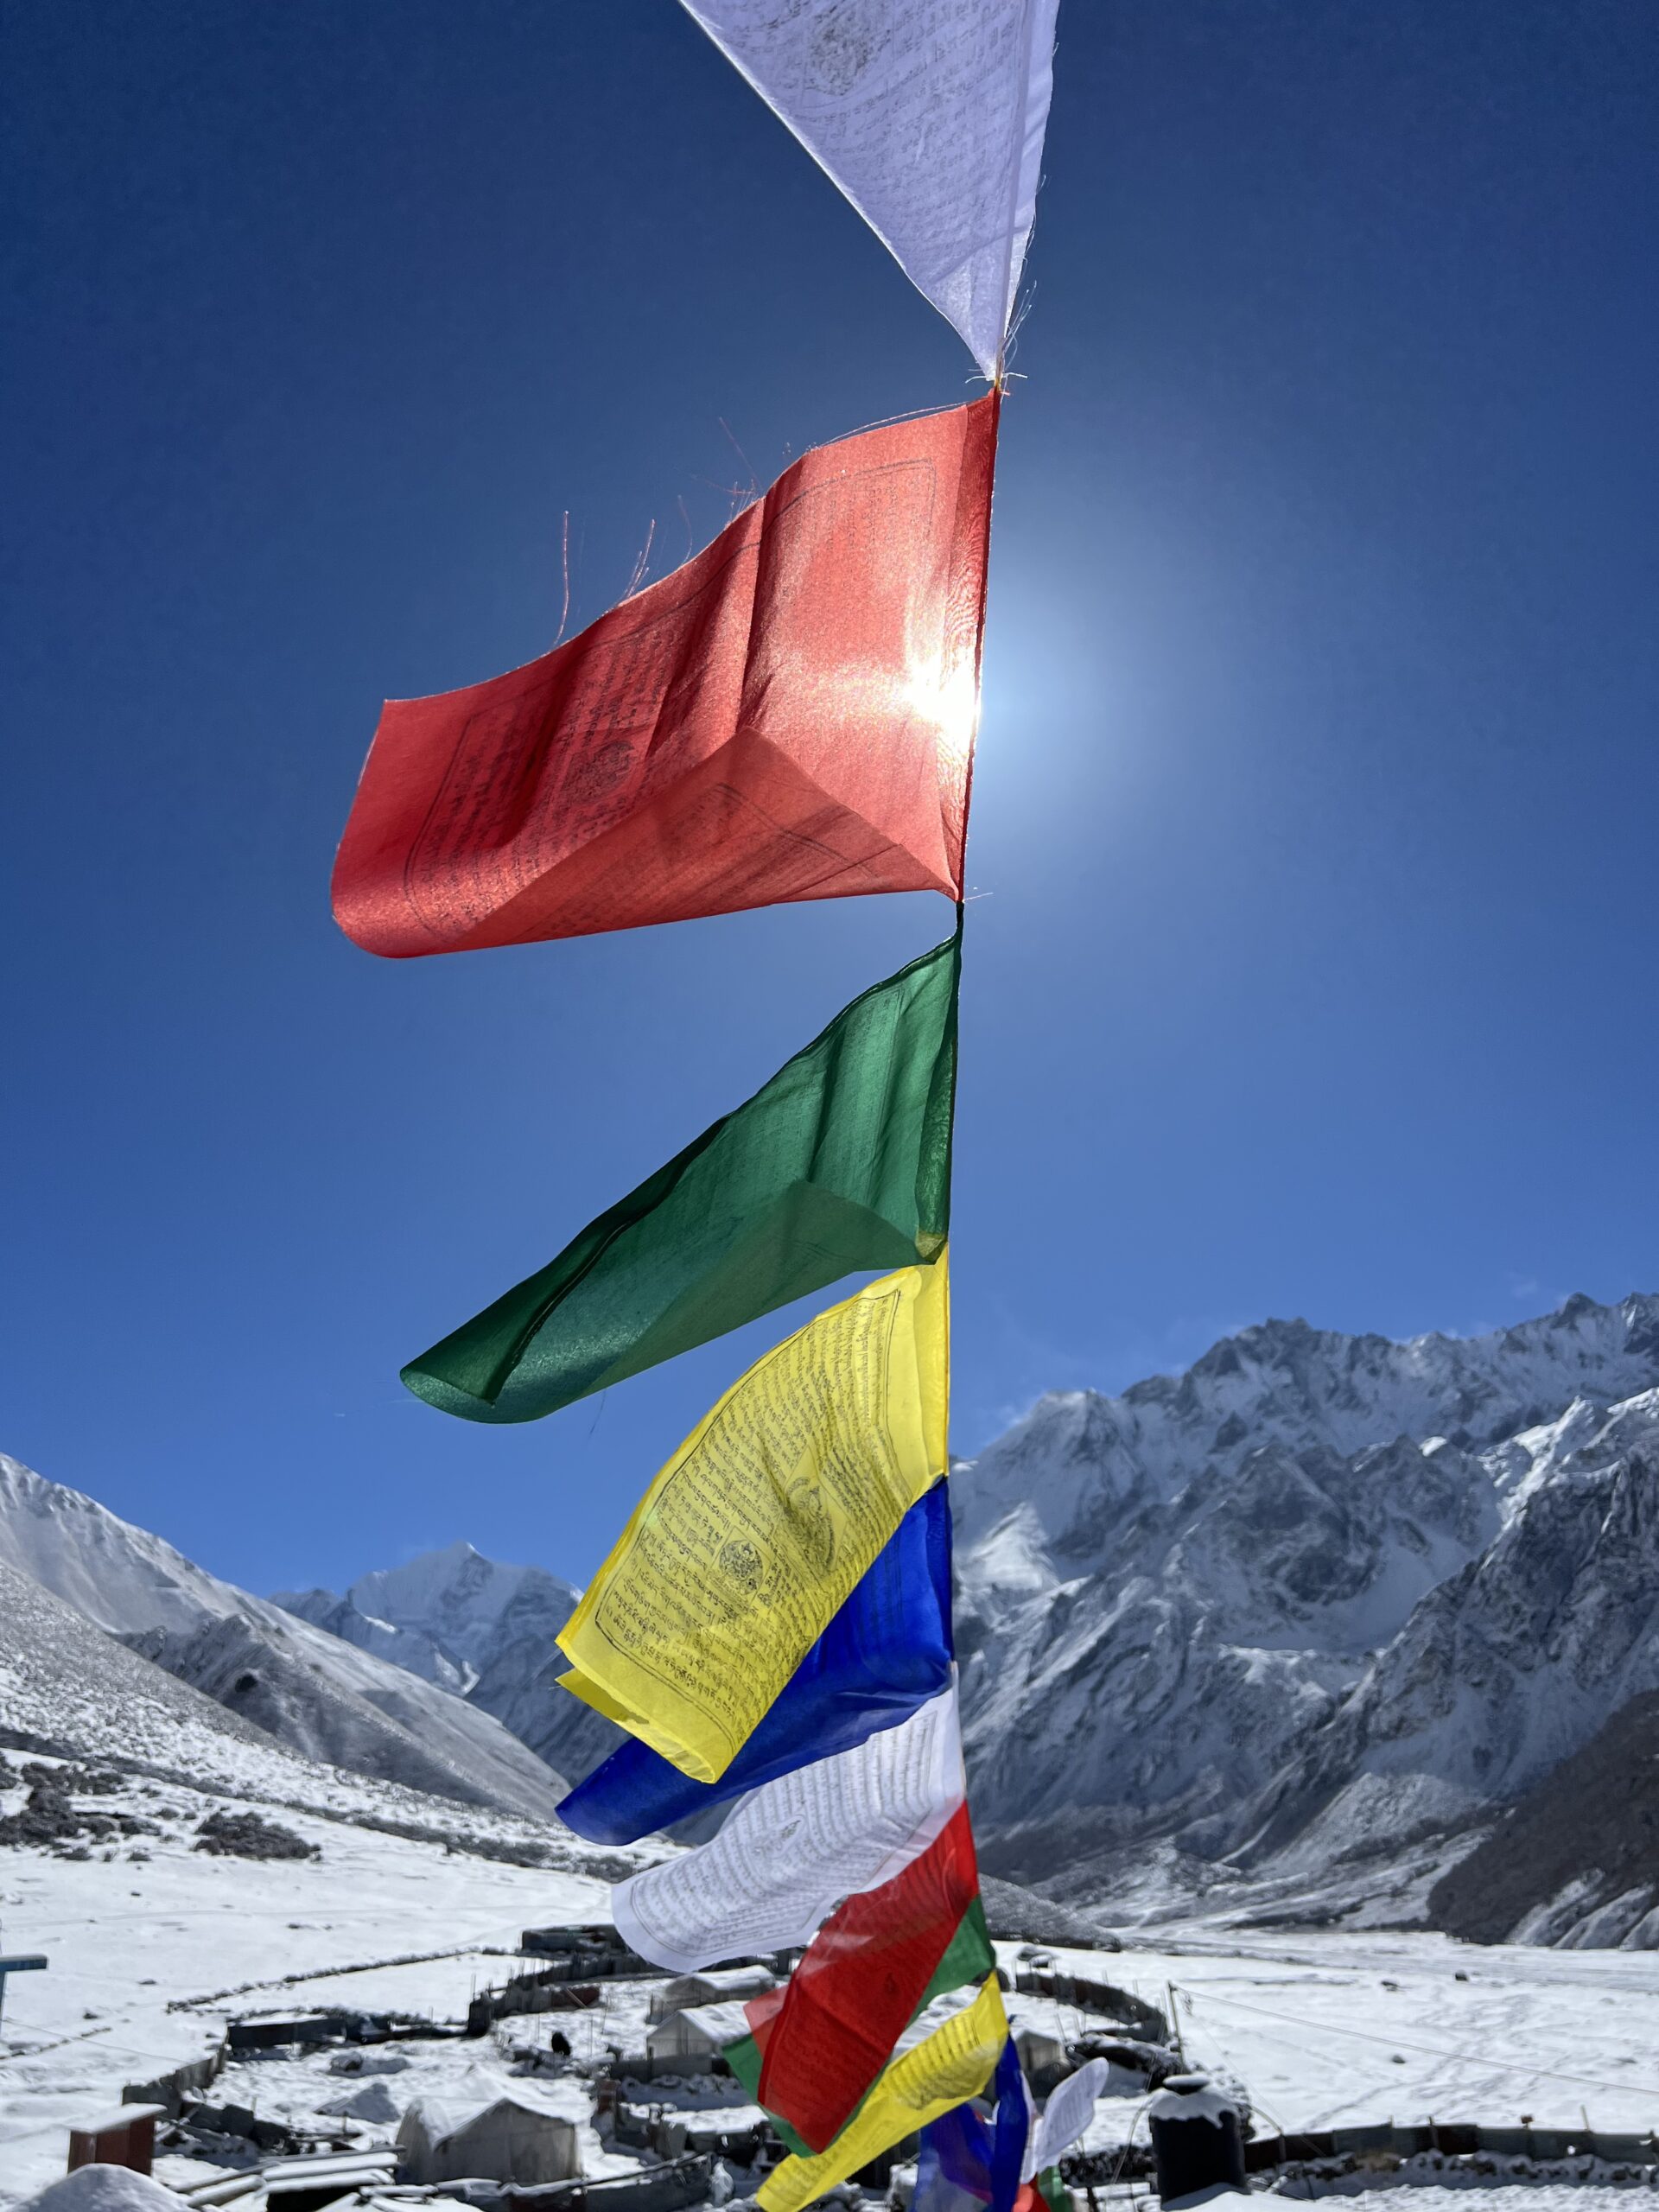 Nepalese prayer flags and snowy mountains.